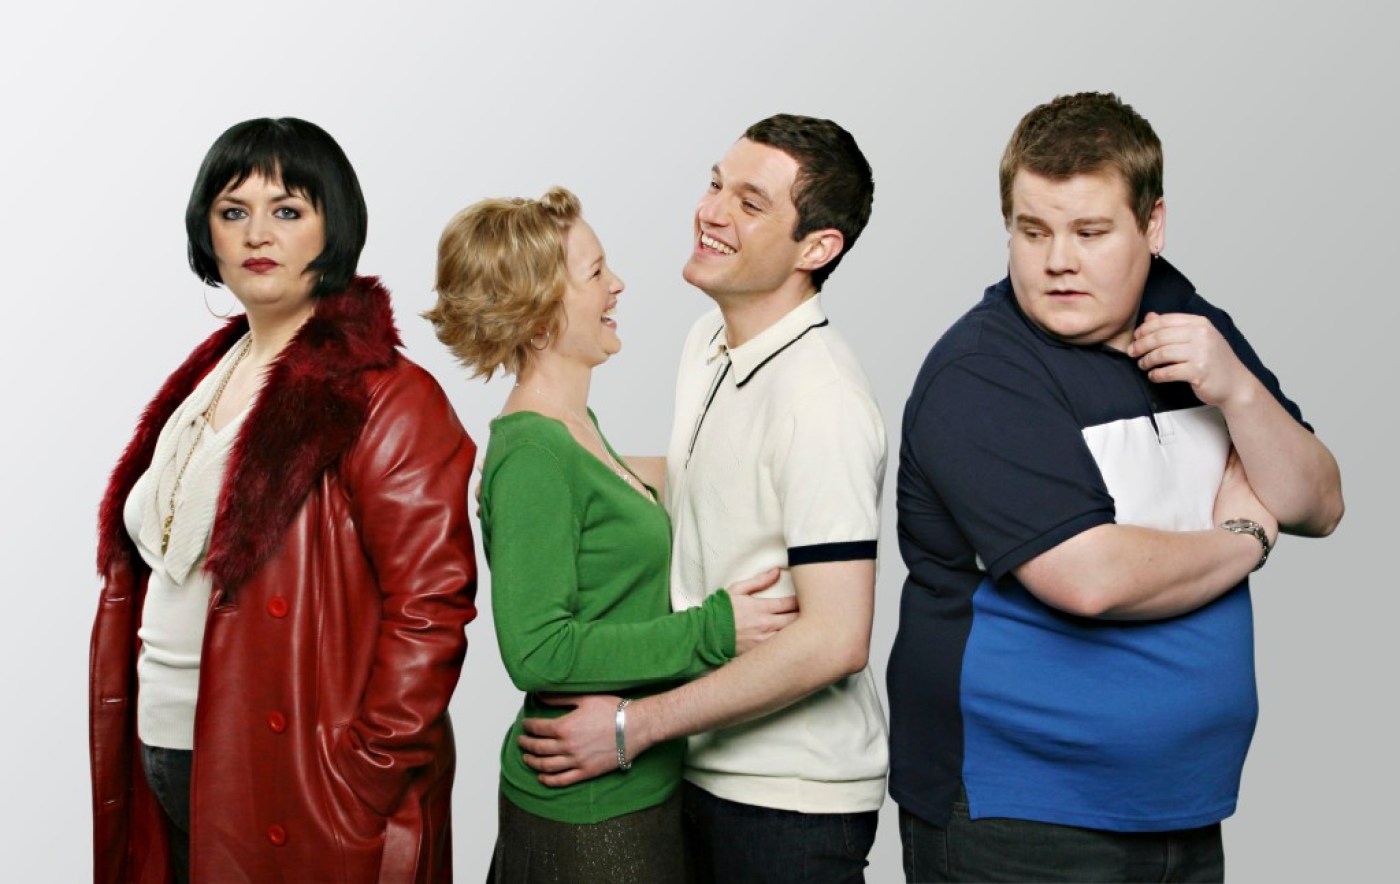 Gavin and Stacey S1 - Picture shows (L-R) Ruth Jones as Nessa, Joanna Page as Stacey, Mathew Horne as Gavin and James Corden as Smithy